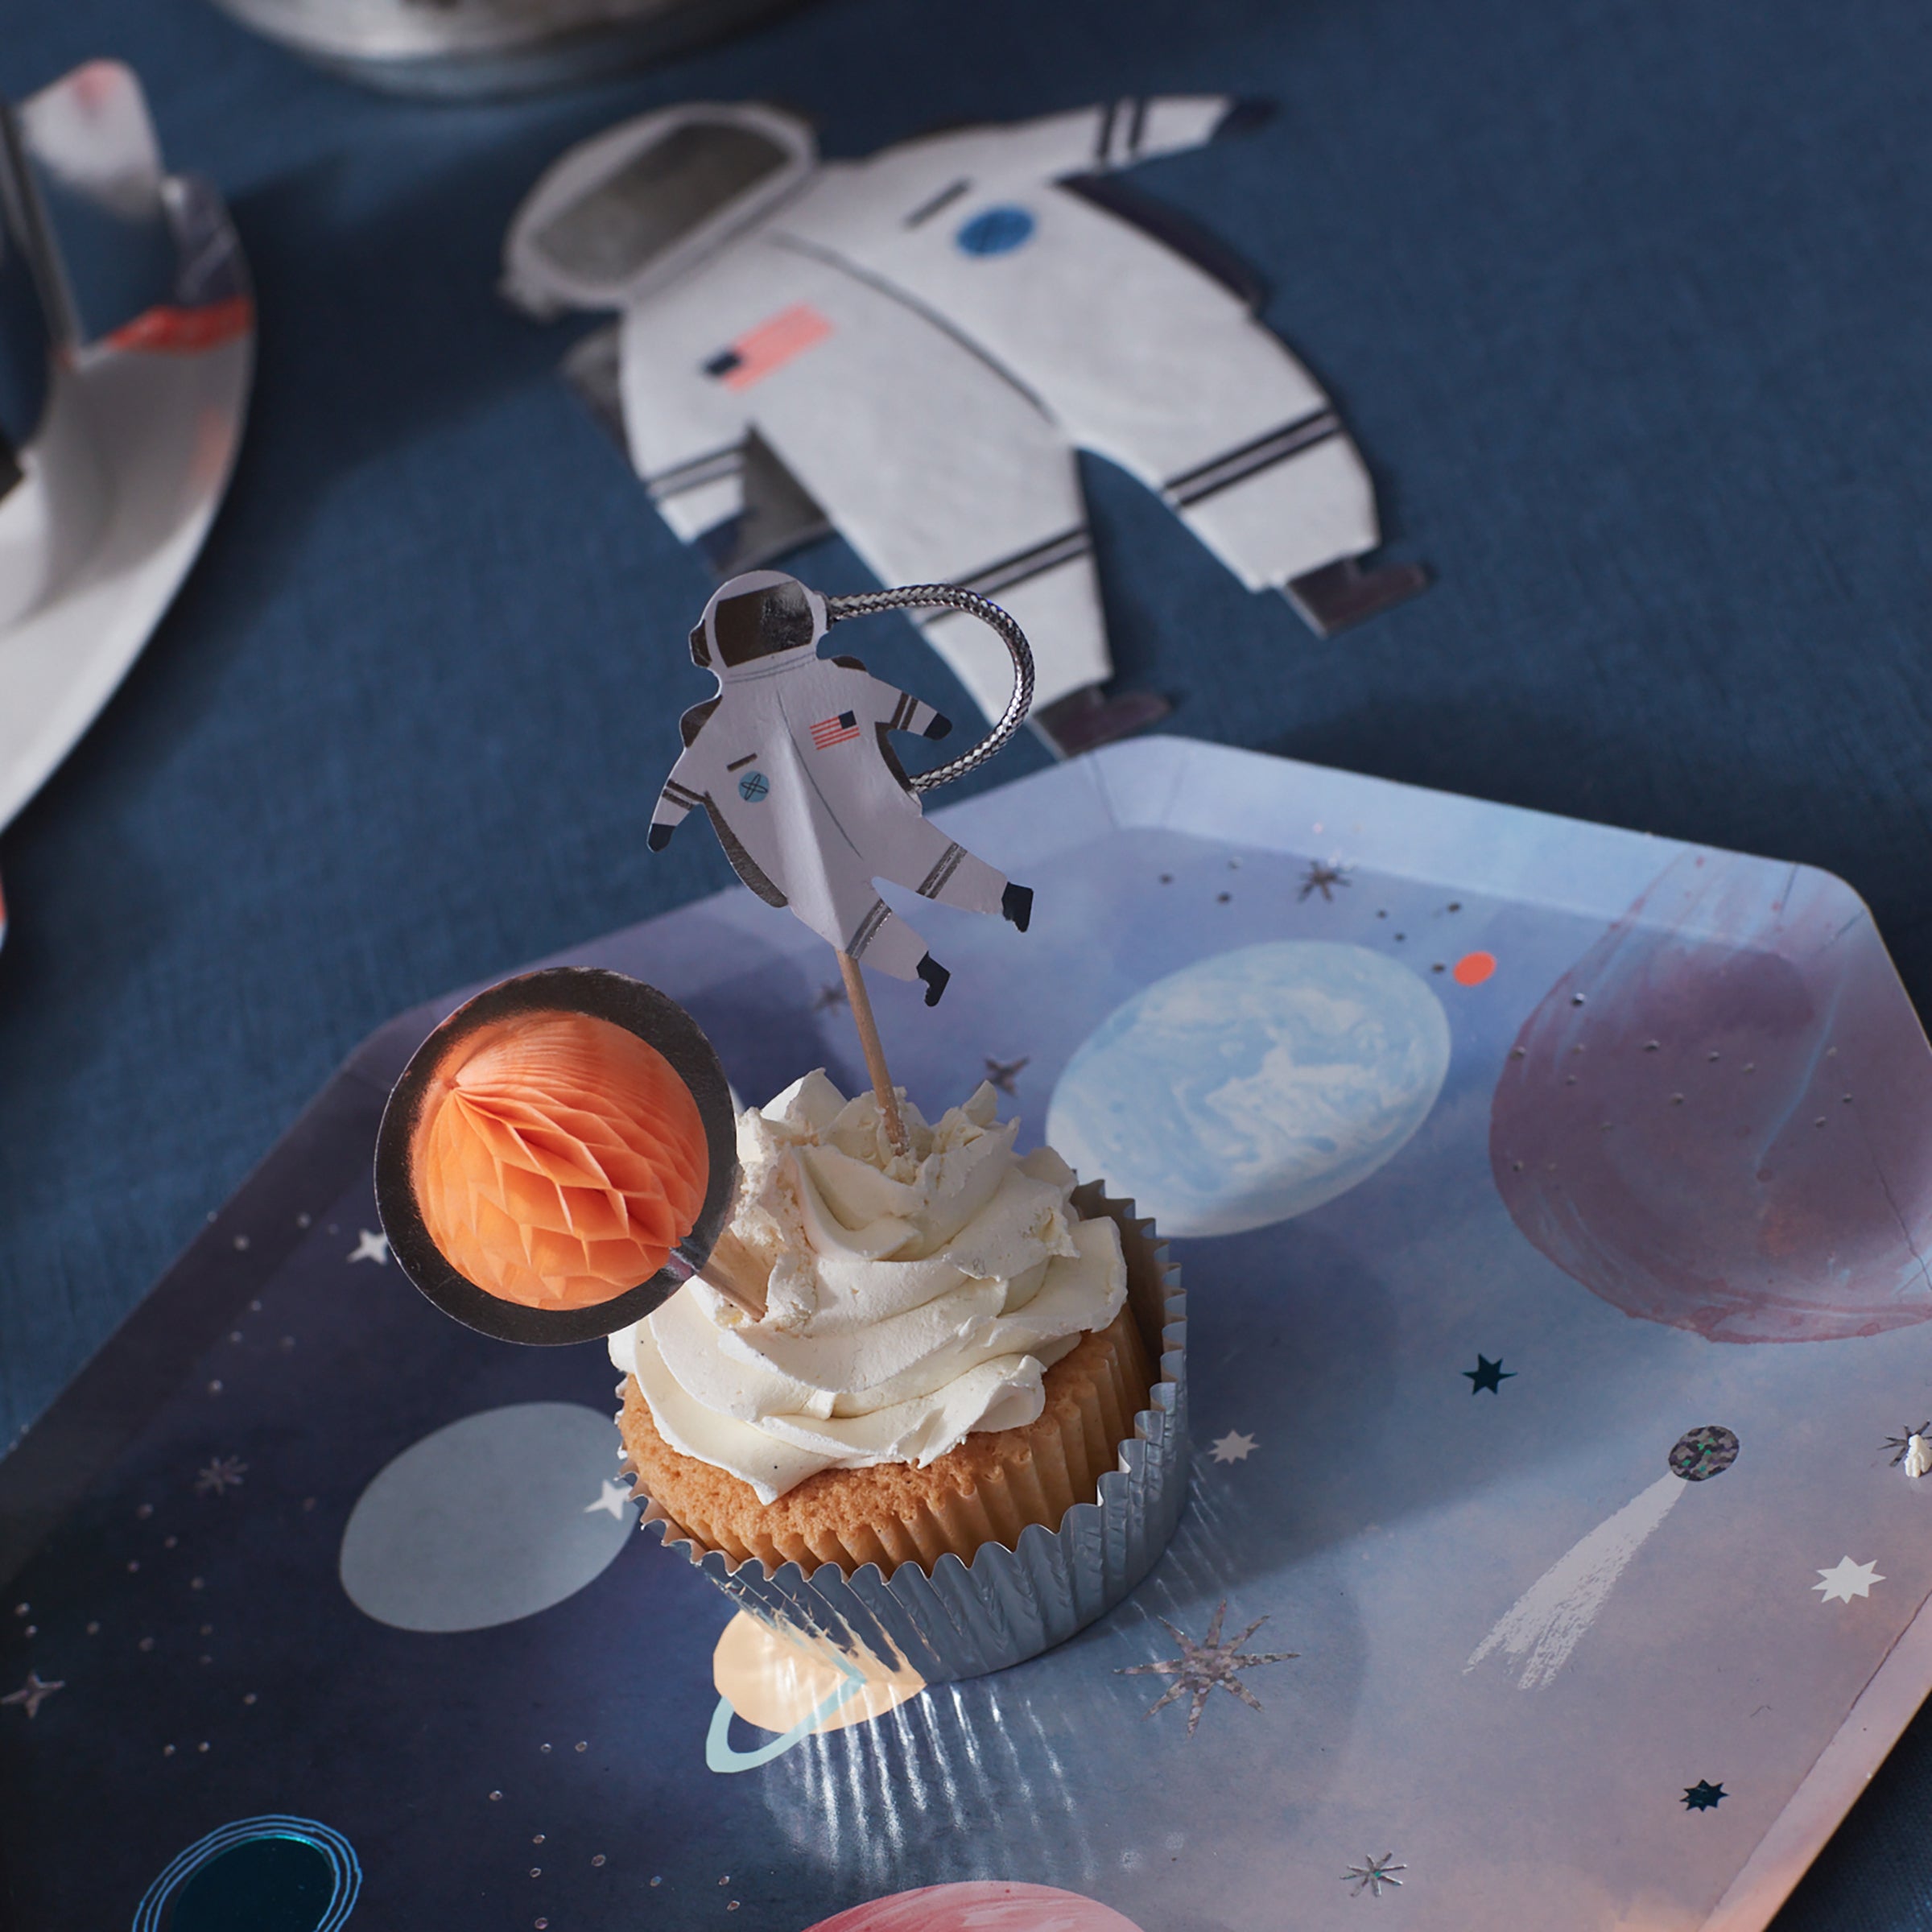 This special cupcake set features 24 cake toppers and 24 cupcake cases perfect for a space party.